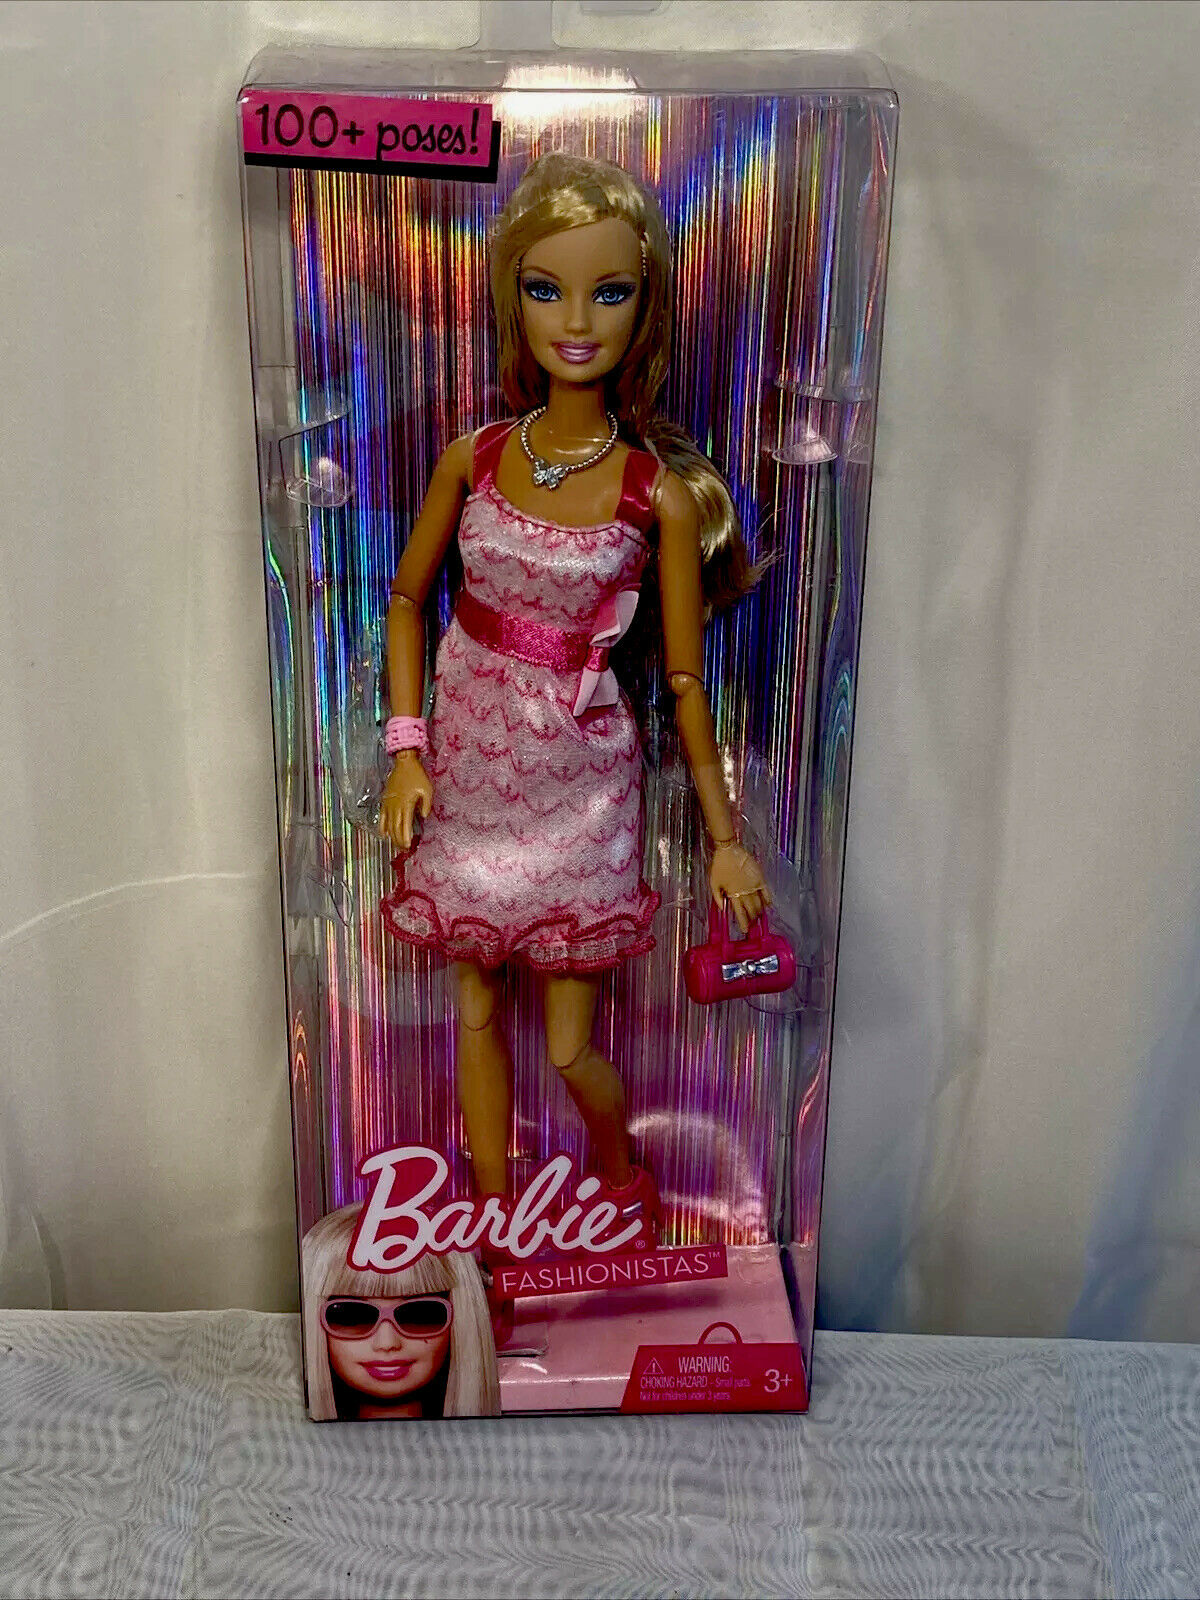 Nrfb 2009 Collectible Barbie Fashionista 100+ Poses M#r9880 Pink Dress/ Blonde